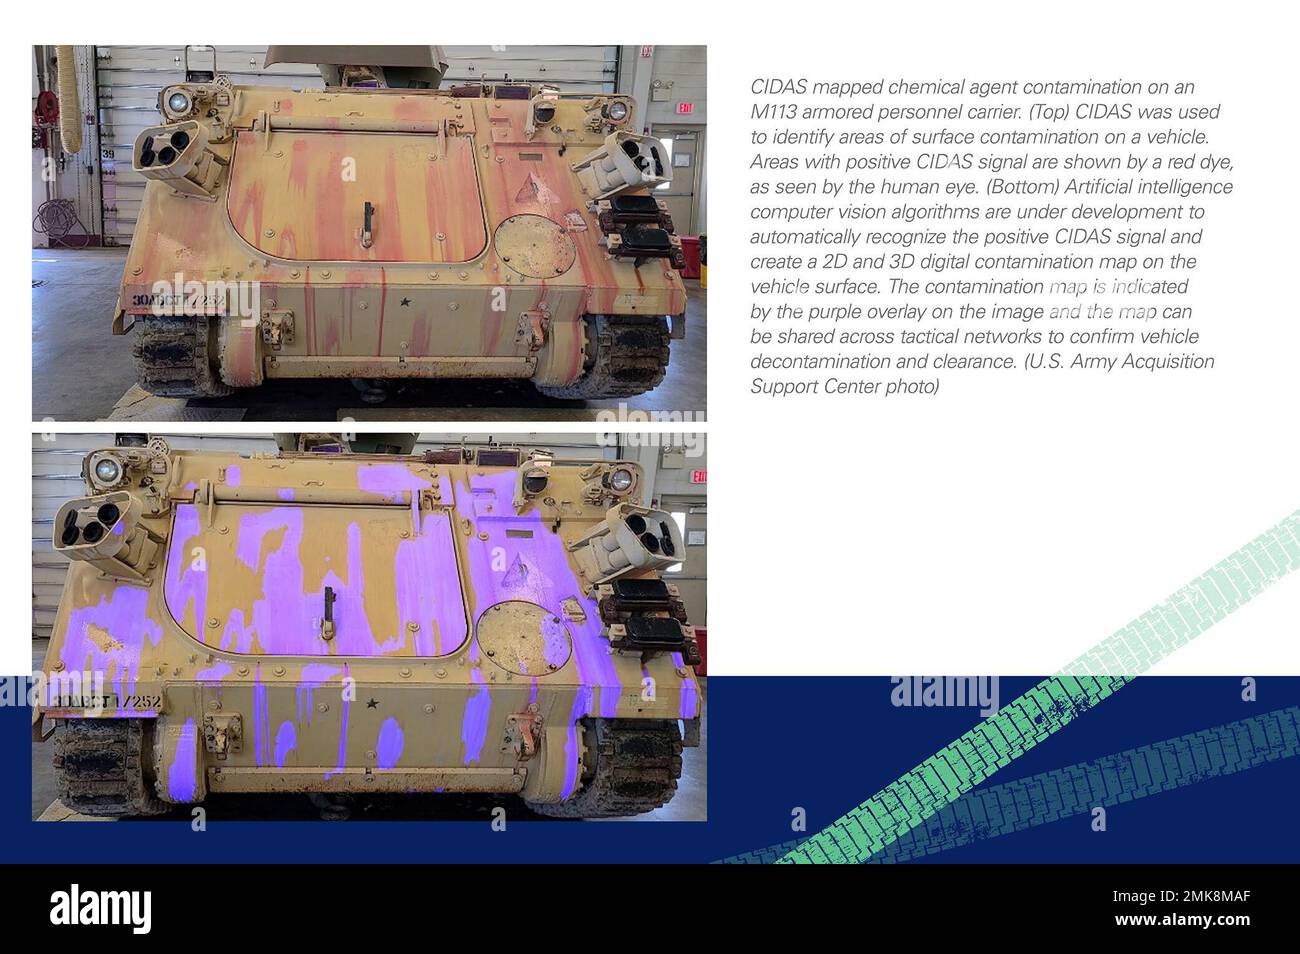 Contamination Indicator Decontamination Assurance System (CIDAS) mapped chemical agent contamination on an M113 armored personnel carrier.   (Top) CIDAS was used to identify areas of surface contamination on a vehicle. Areas with positive CIDAS signal are shown by a red dye, as seen by the human eye.   (Bottom) Artificial intelligence computer vision algorithms are under development to automatically recognize the positive CIDAS signal and create a 2D and 3D digital contamination map on the vehicle surface. The contamination map is indicated by the purple overlay on the image and the map can be Stock Photo